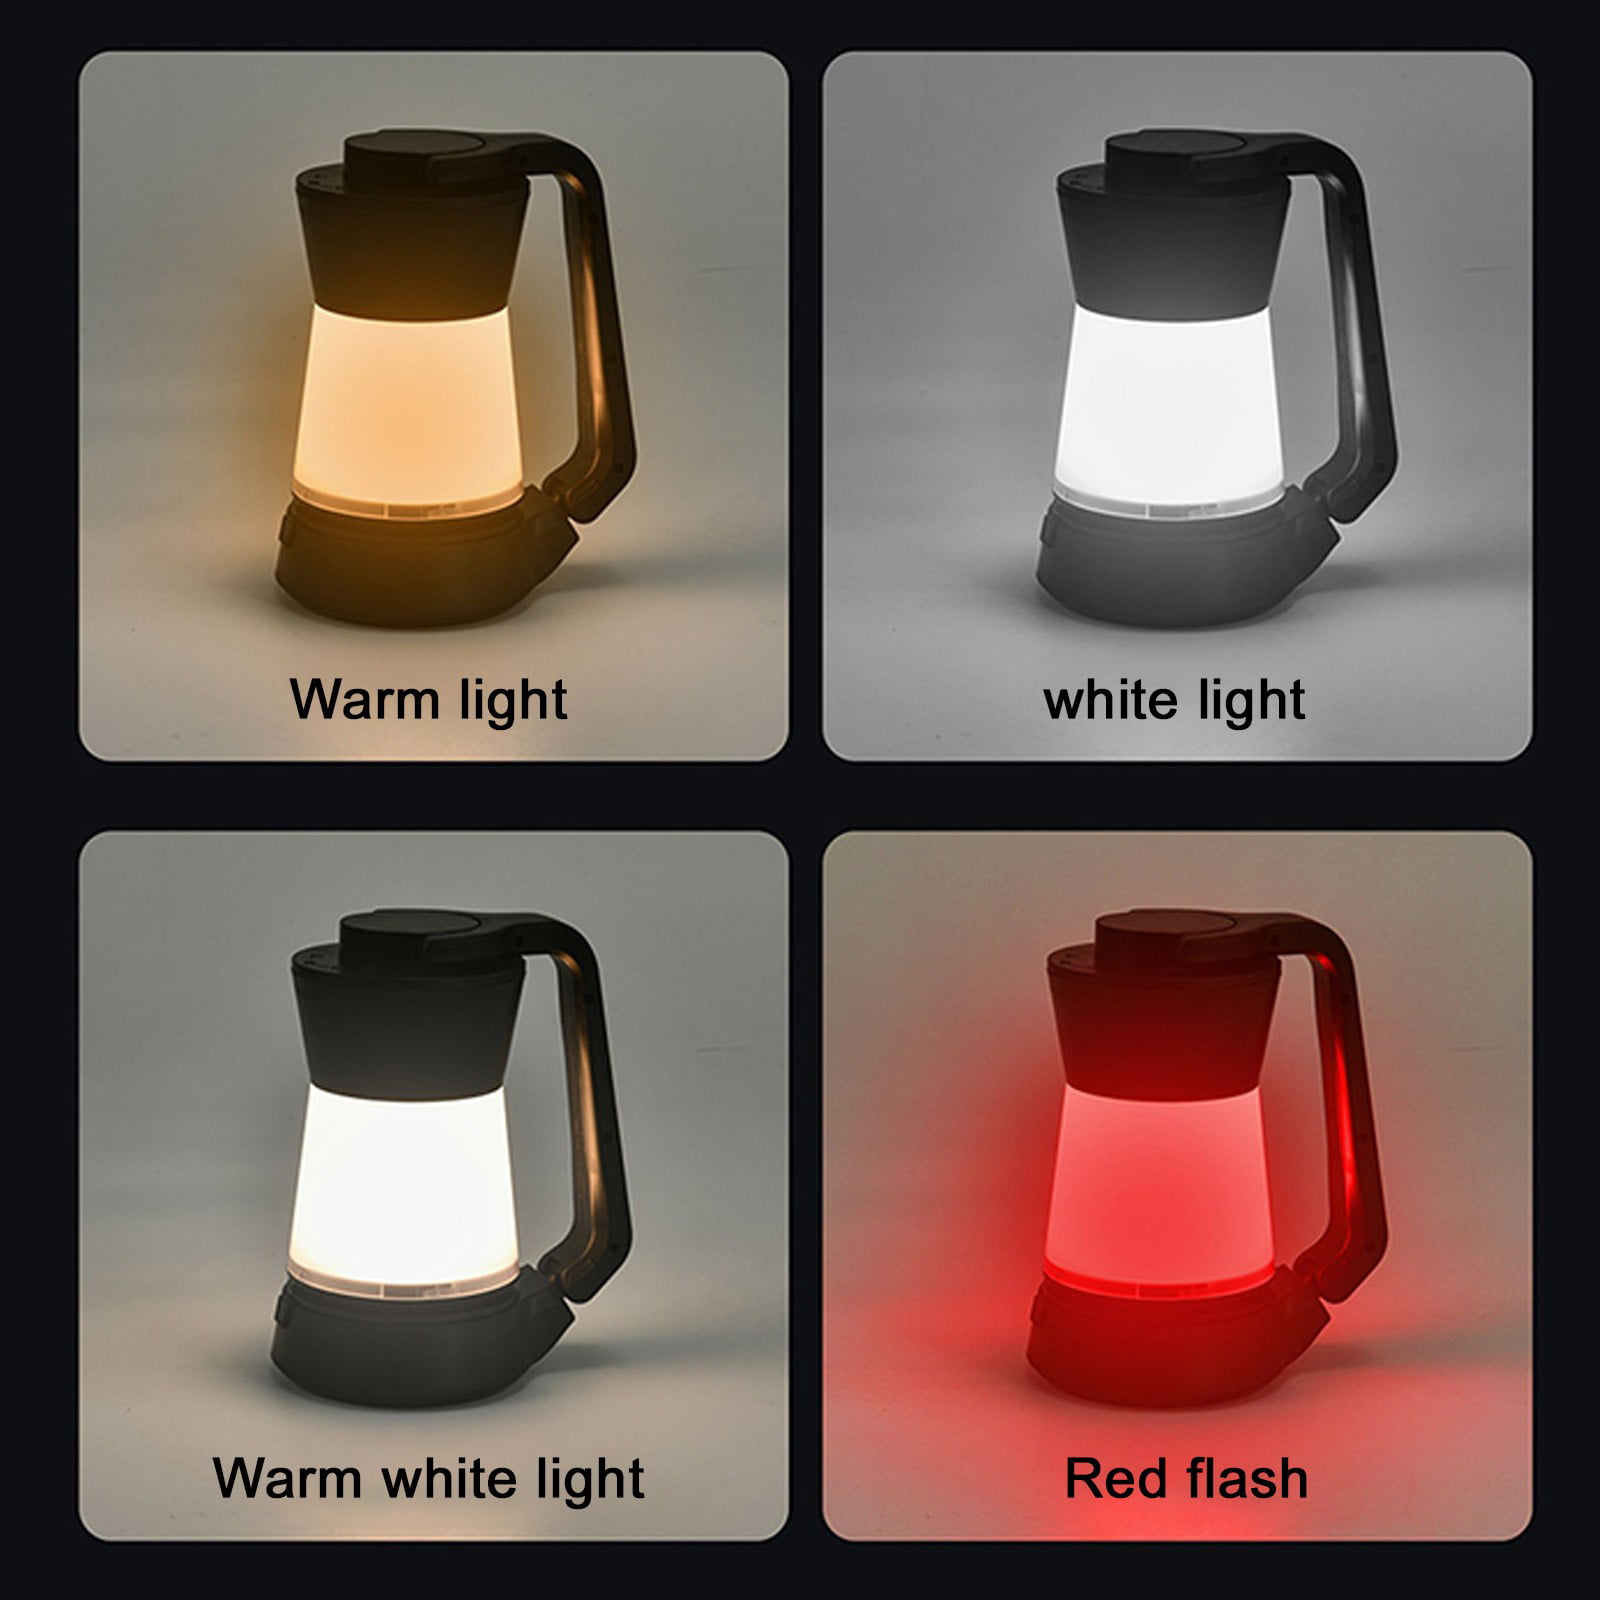 H11 3-in-1 multifunctional camping light, 3 colour temperatures, infinitely  dimmable photo fill light with